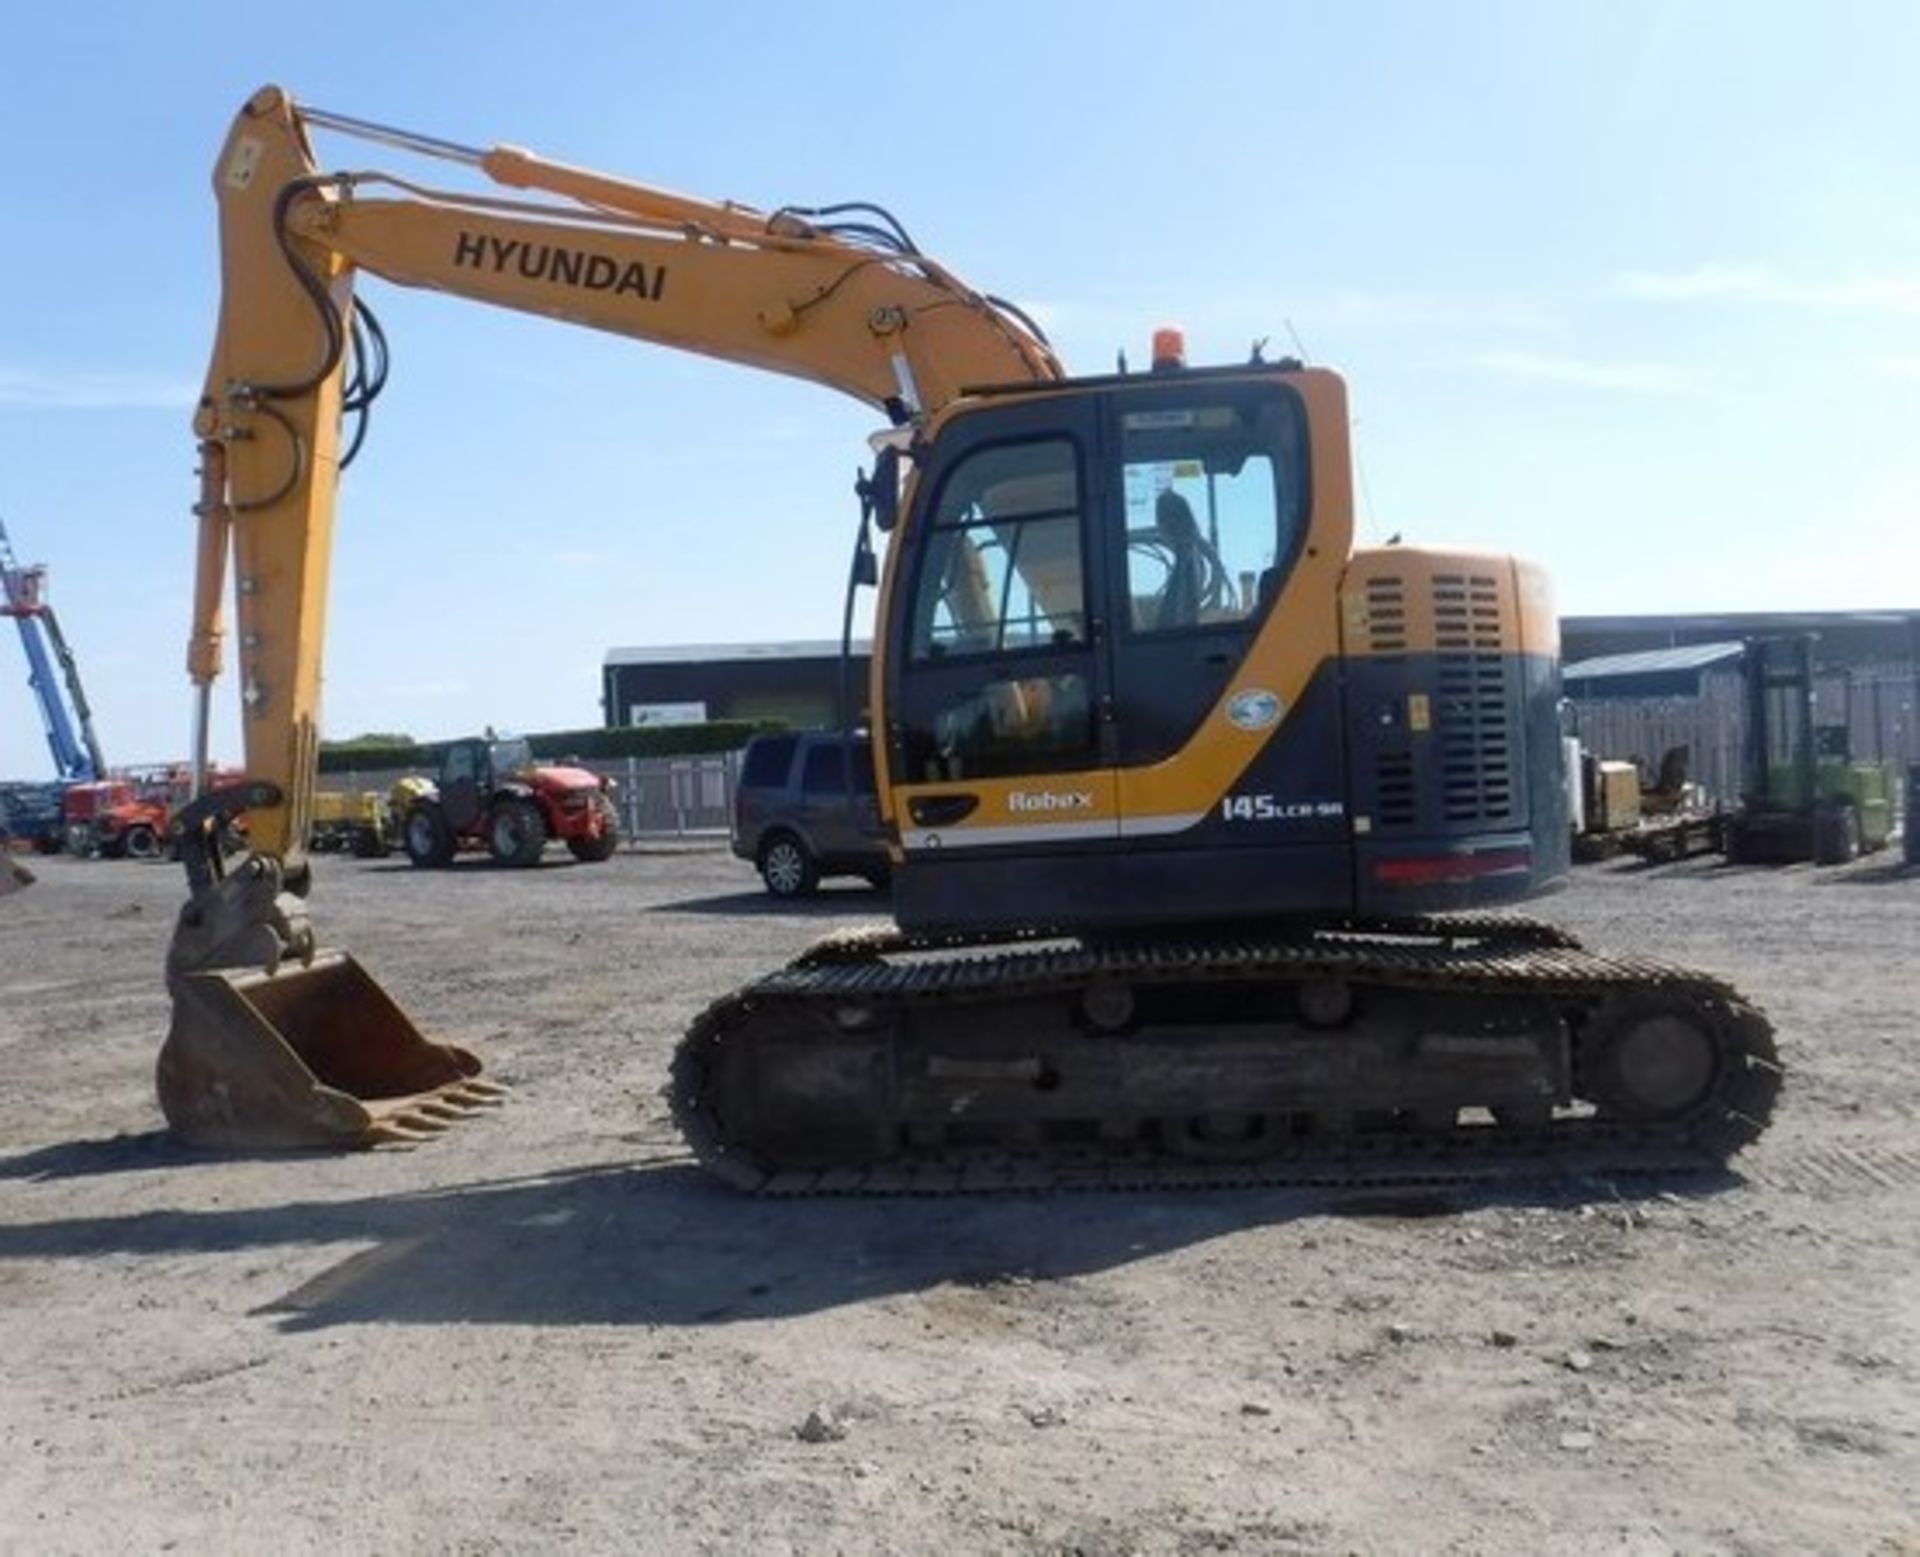 2014 HYUNDAI 145-9A excavator c/w 1 bucket. Short body version ideal for site work. s/n 068. 4263hr - Image 29 of 32